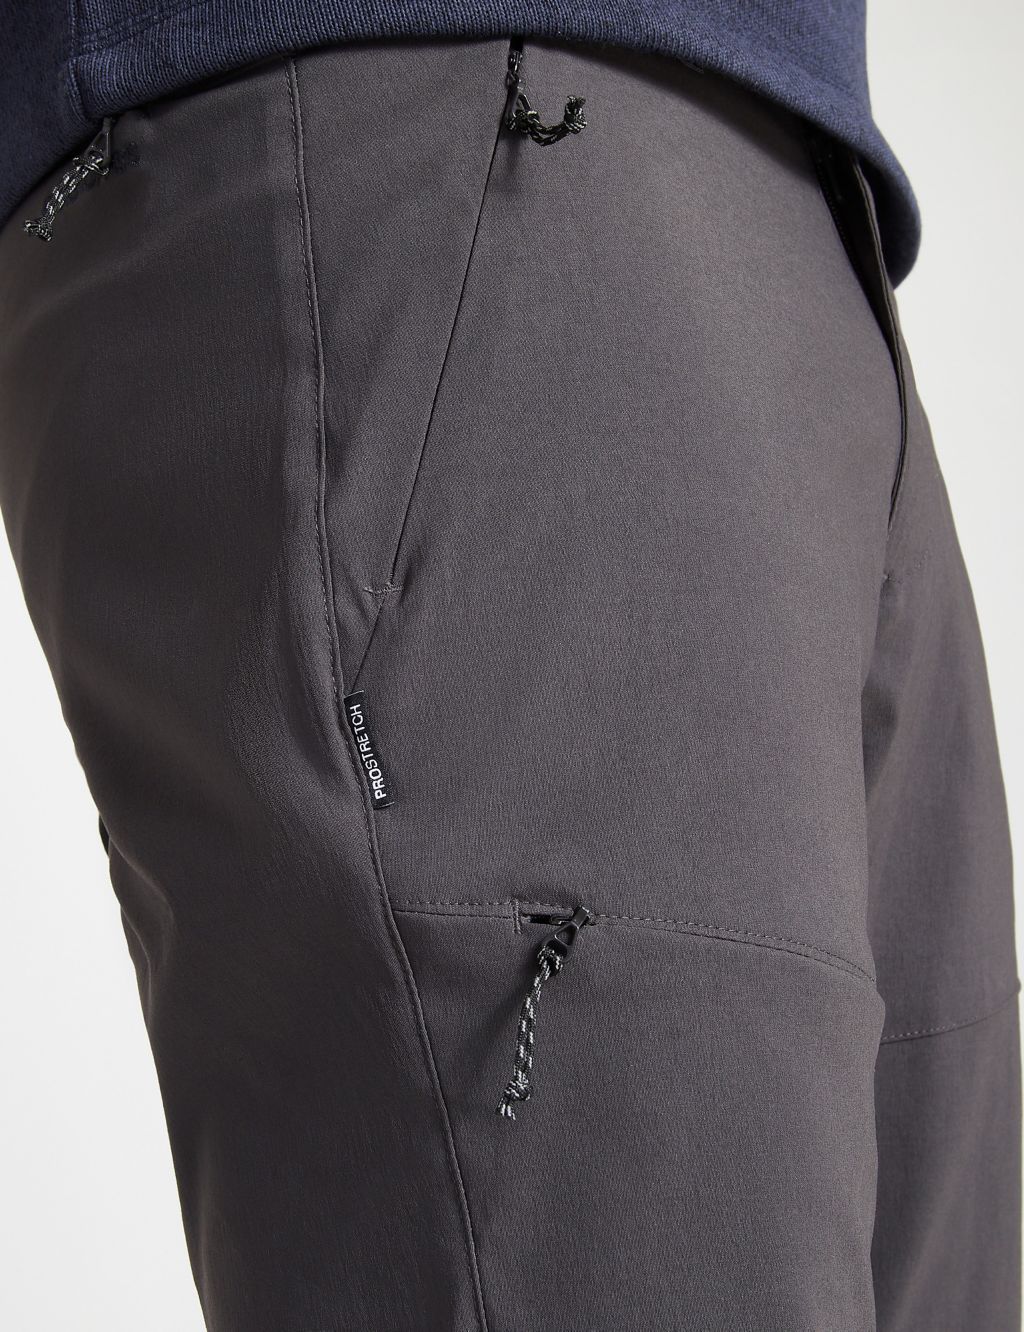 Kiwi Tailored Fit Stretch Trekking Trousers image 3